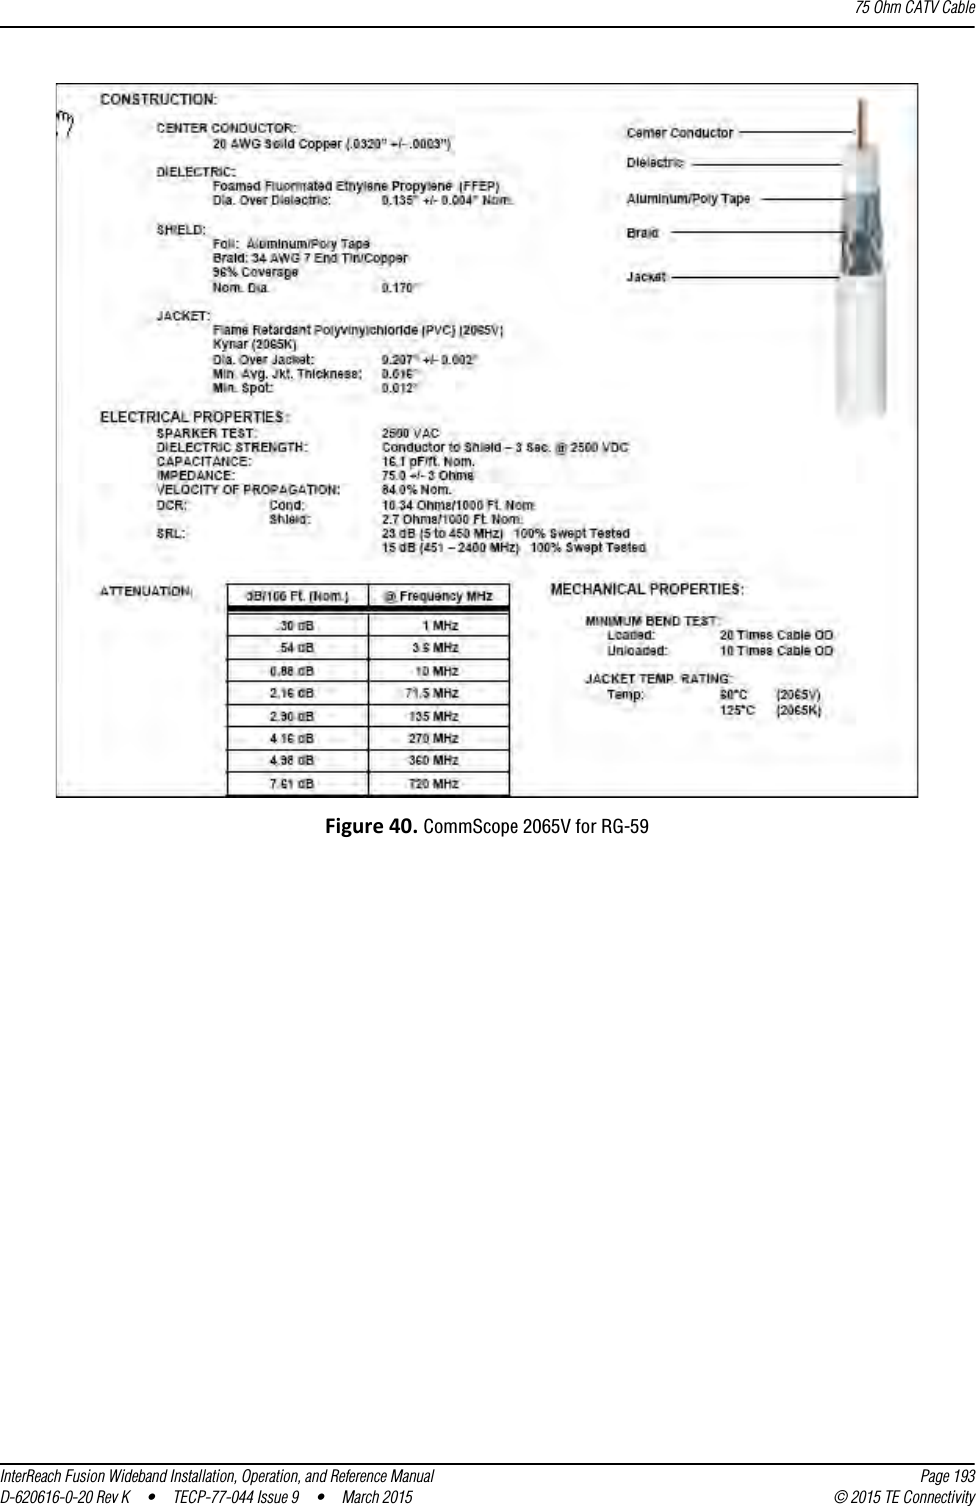 75 Ohm CATV CableInterReach Fusion Wideband Installation, Operation, and Reference Manual Page 193D-620616-0-20 Rev K  •  TECP-77-044 Issue 9  •  March 2015 © 2015 TE ConnectivityFigure 40. CommScope 2065V for RG-59